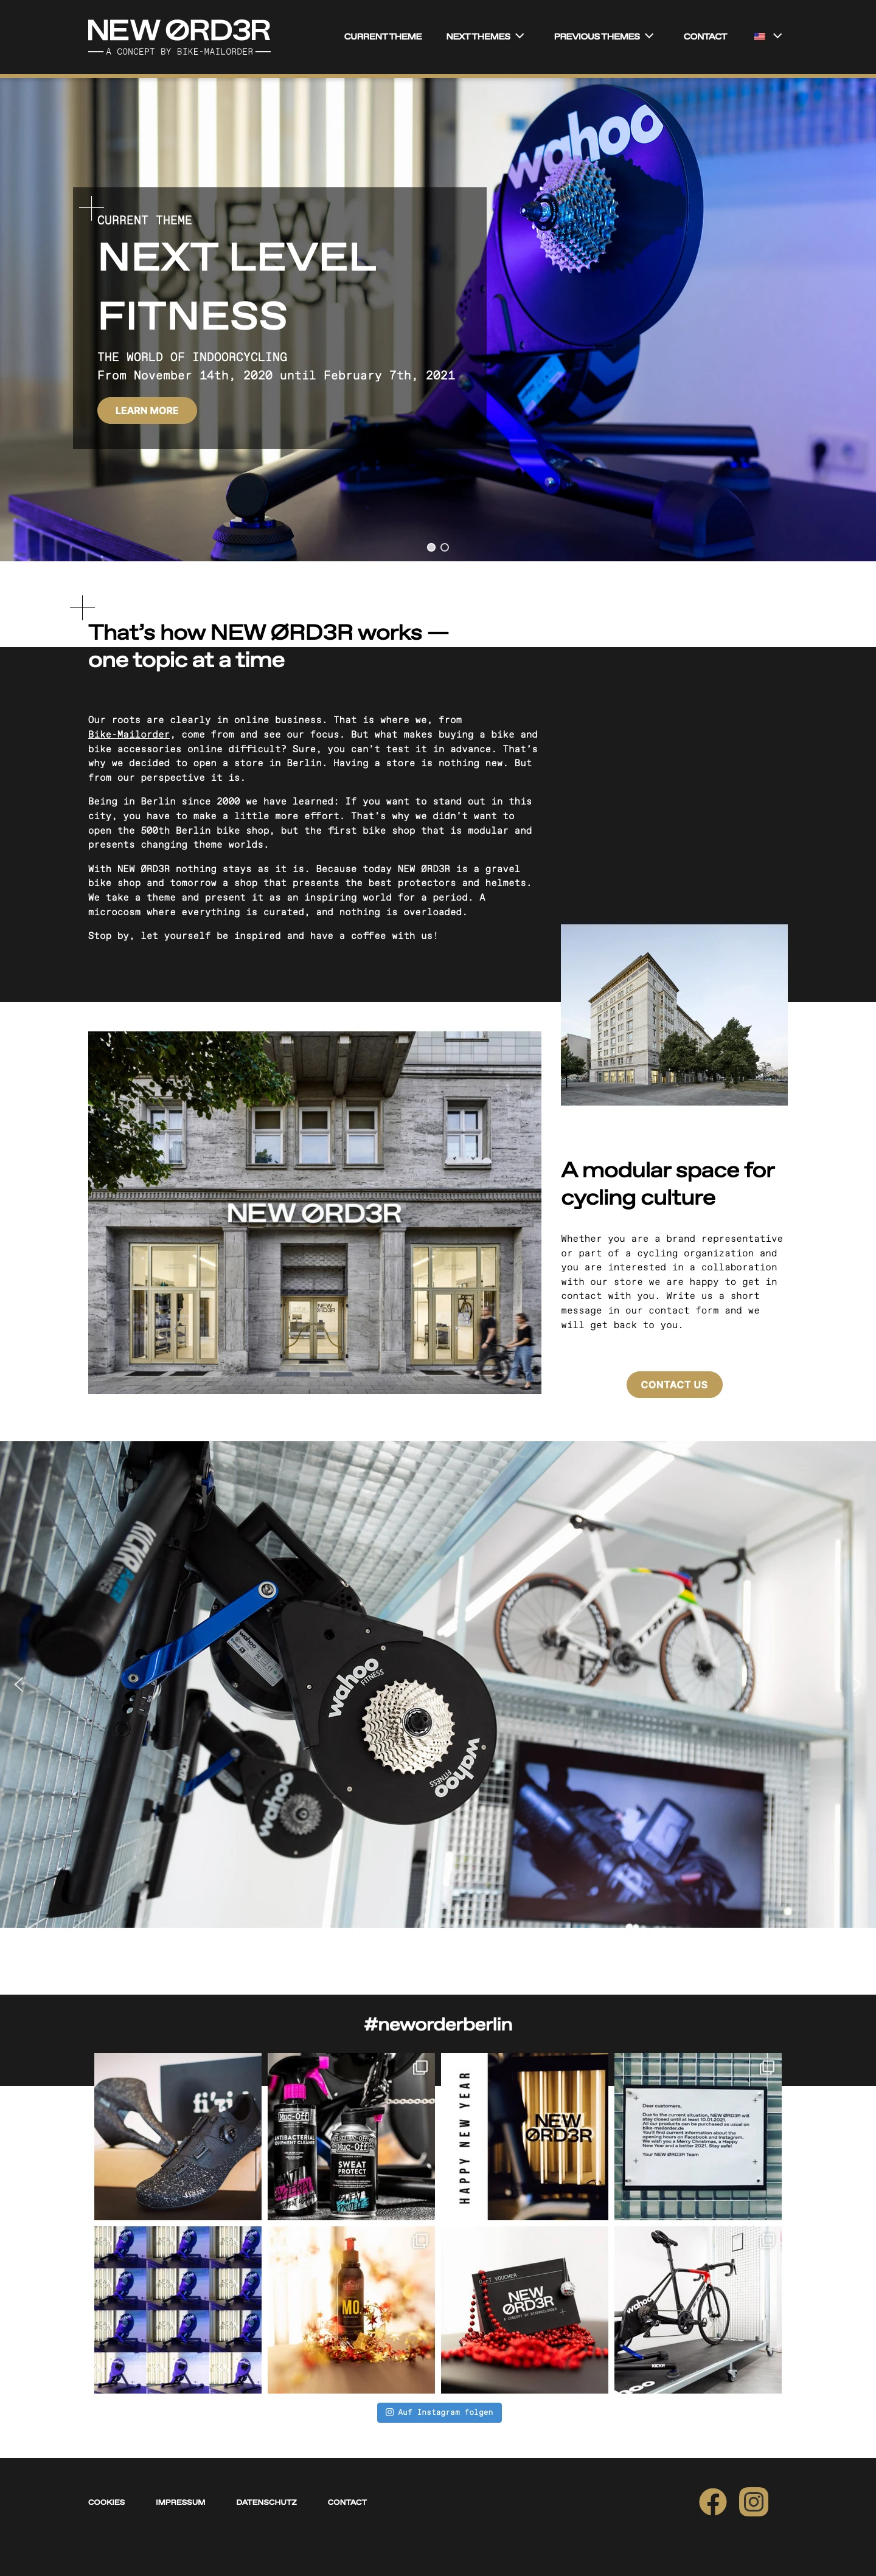 NEW ORDER Landing Page Example: The New Order store is a modular space for cycling culture. A store that offers different theme worlds for a certain period of time.